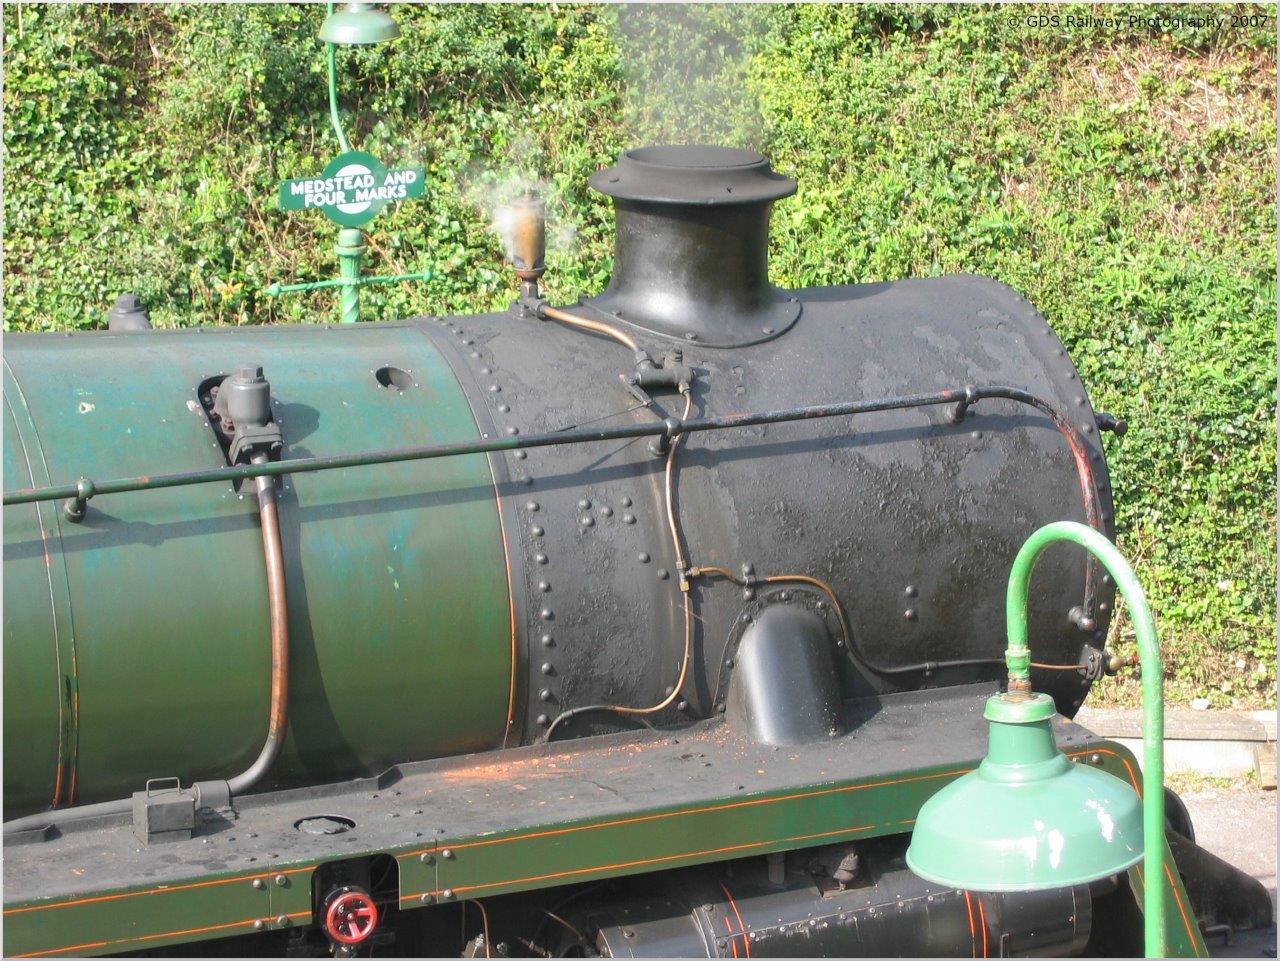 Std 5 73096 with damaged and pealing paint in 2007